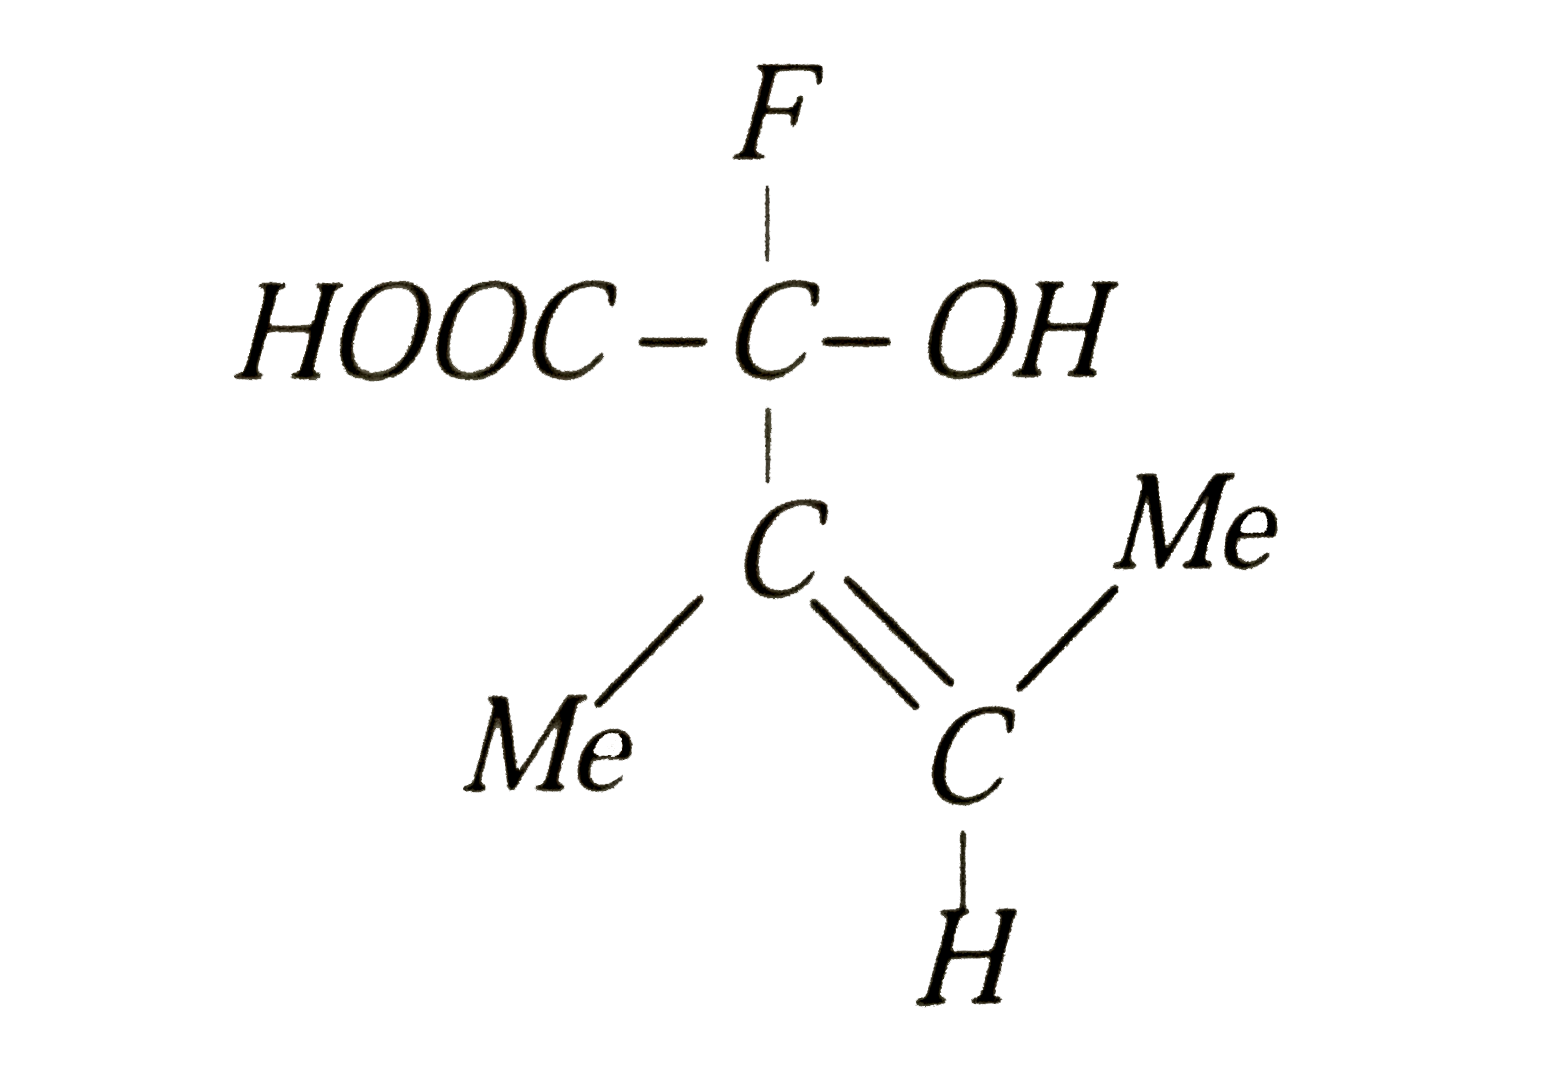 The configuration of the chiral centre and the geometry of the double bond in the following molecule can be described by